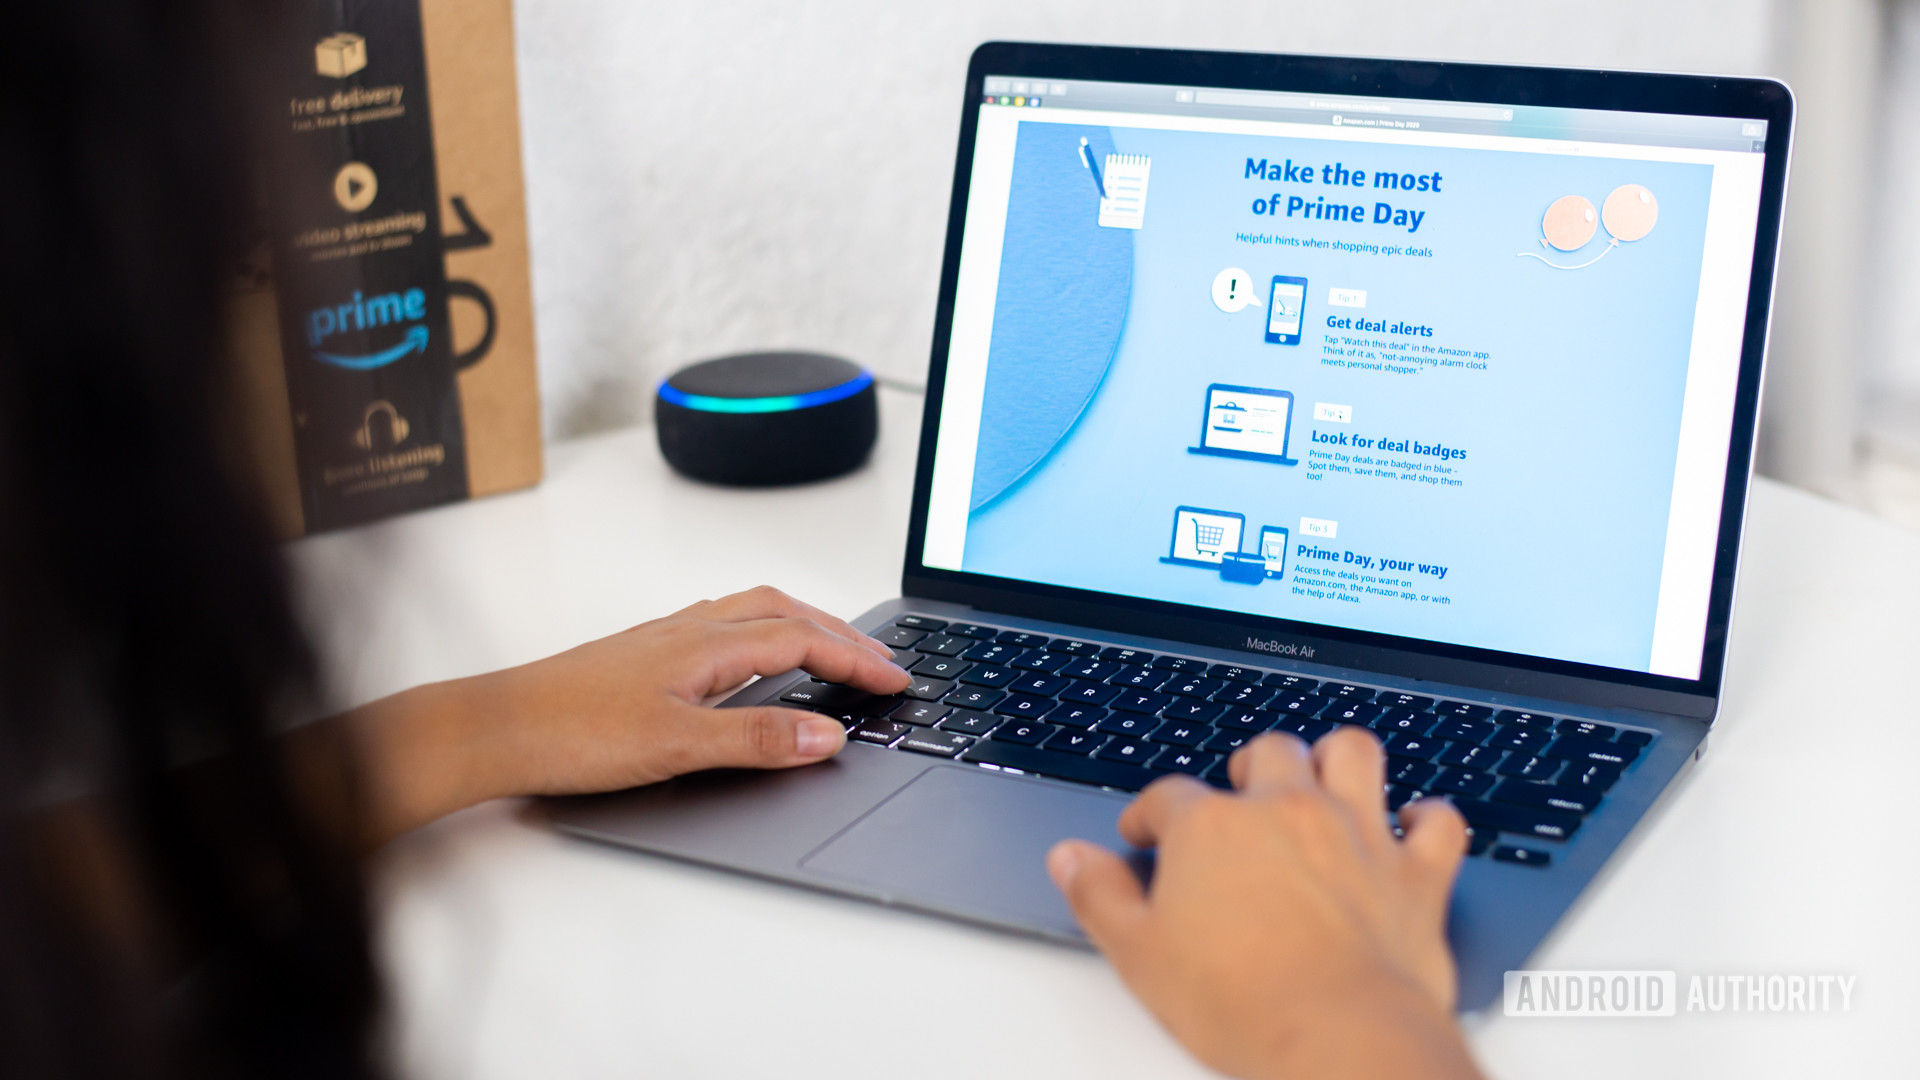 Prime Day not done yet: Top deals to snag on day 2